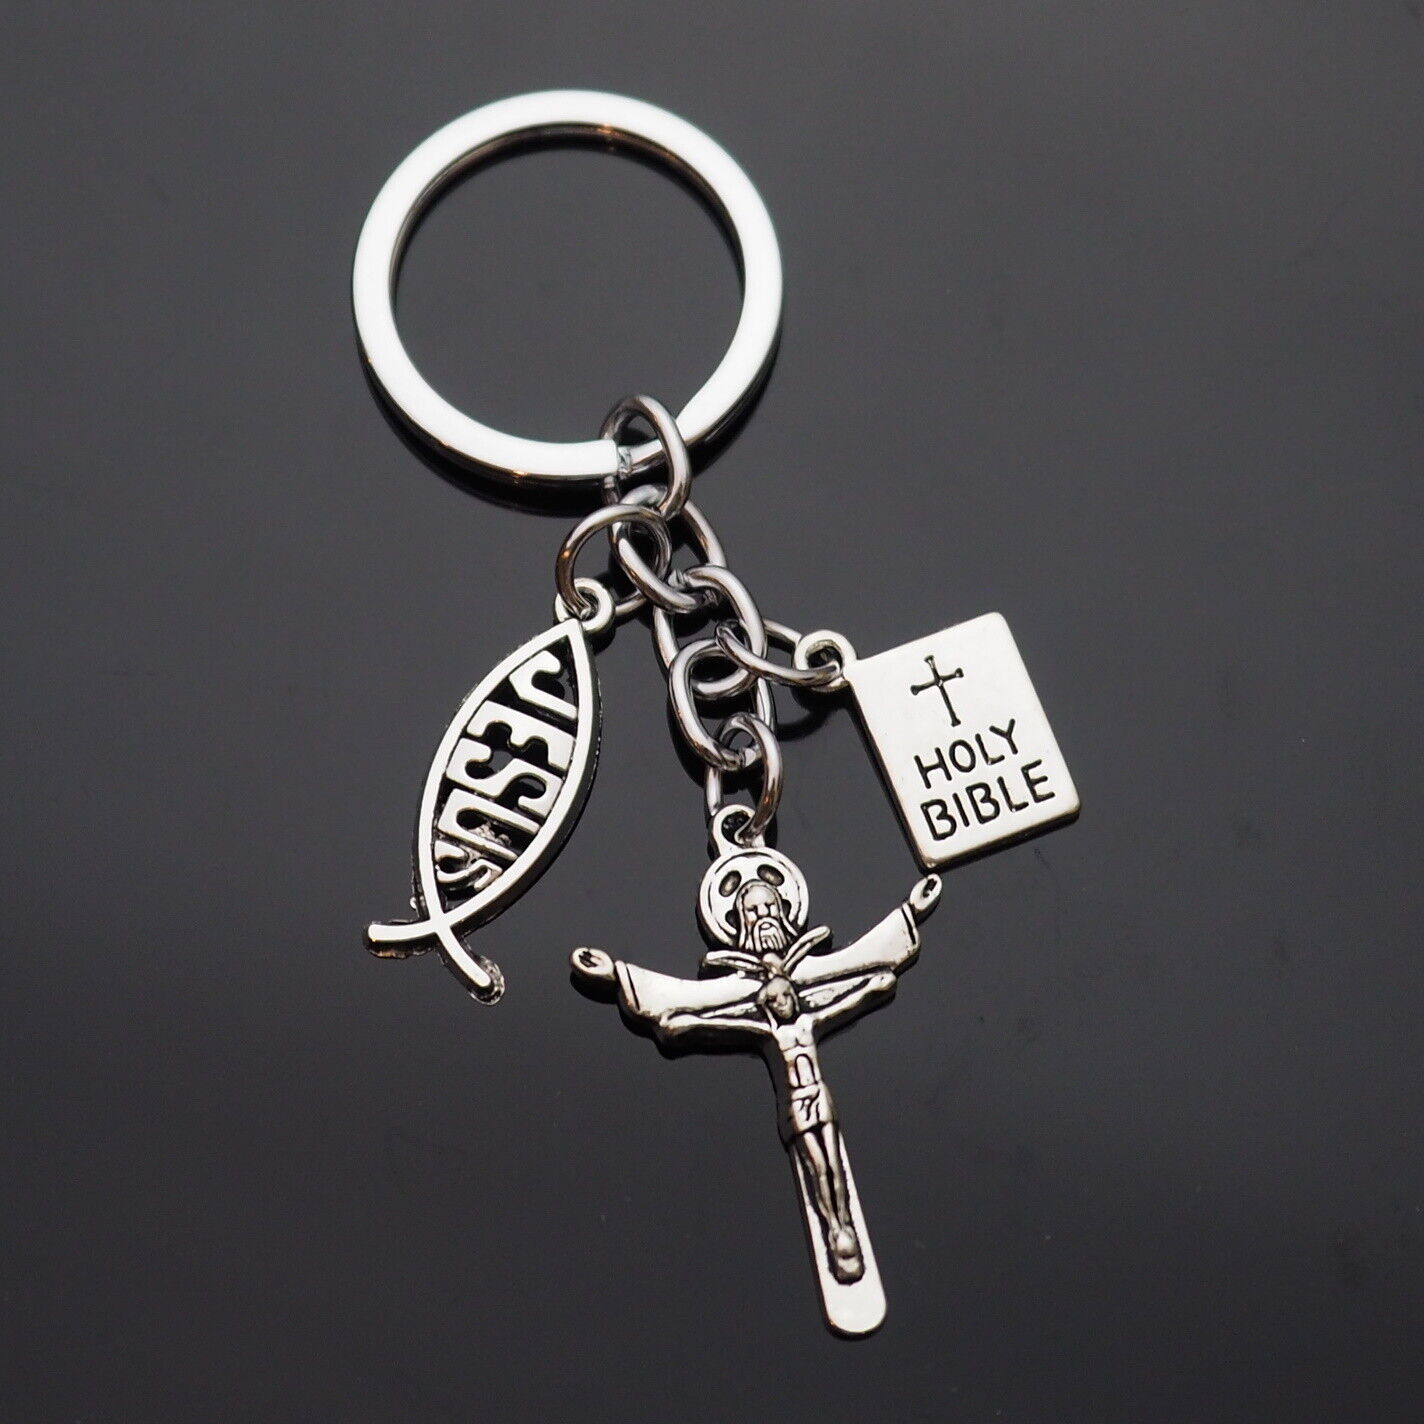 Jesus on the Cross Fish Christian Holy Bible Charms Keychain Gift Key Chain Ring